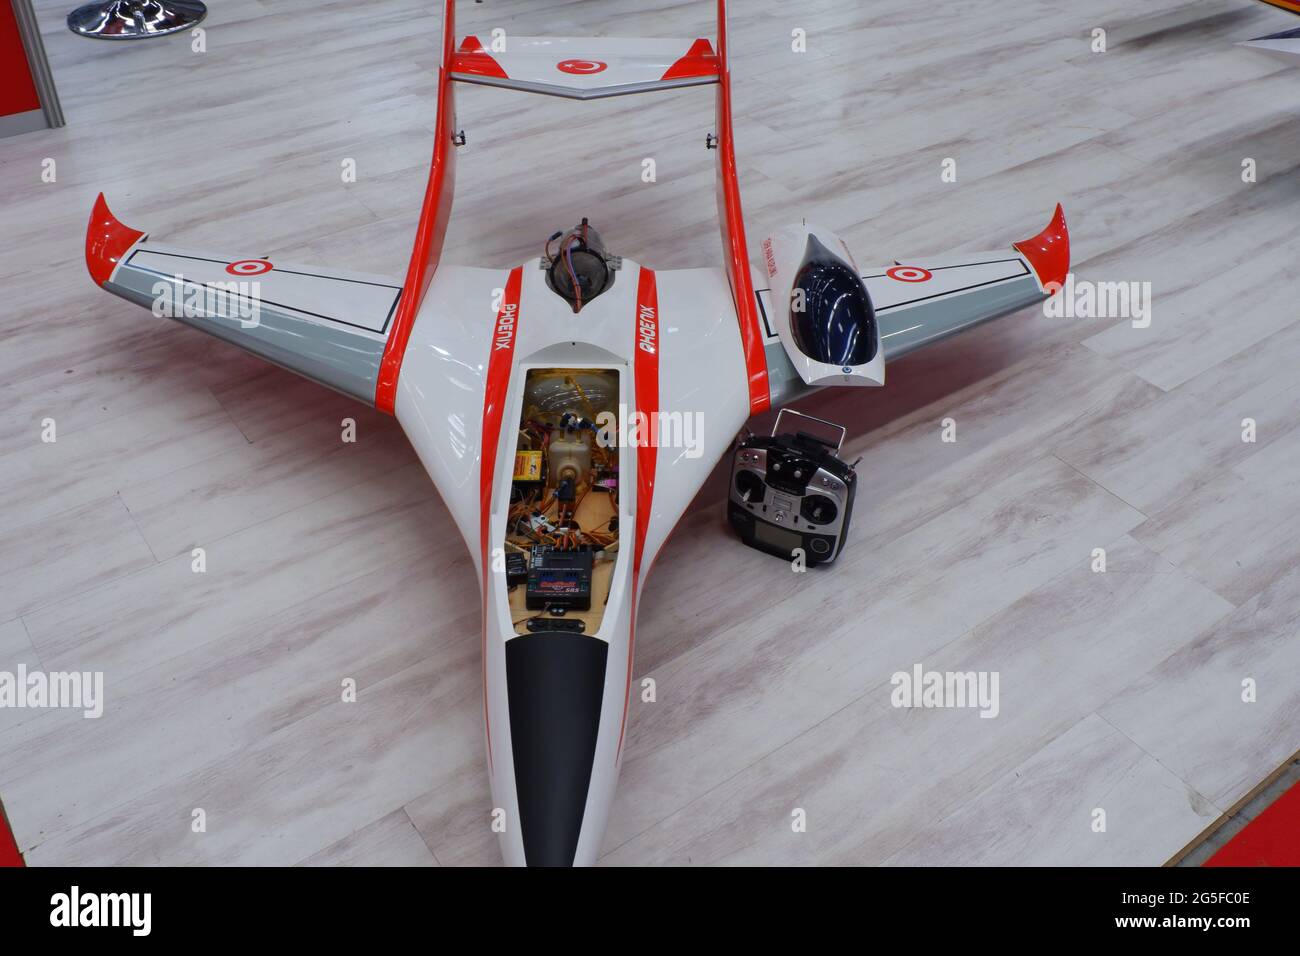 Model of a Designed Turkish Plane indoor on the floor at an exhibition Stock Photo